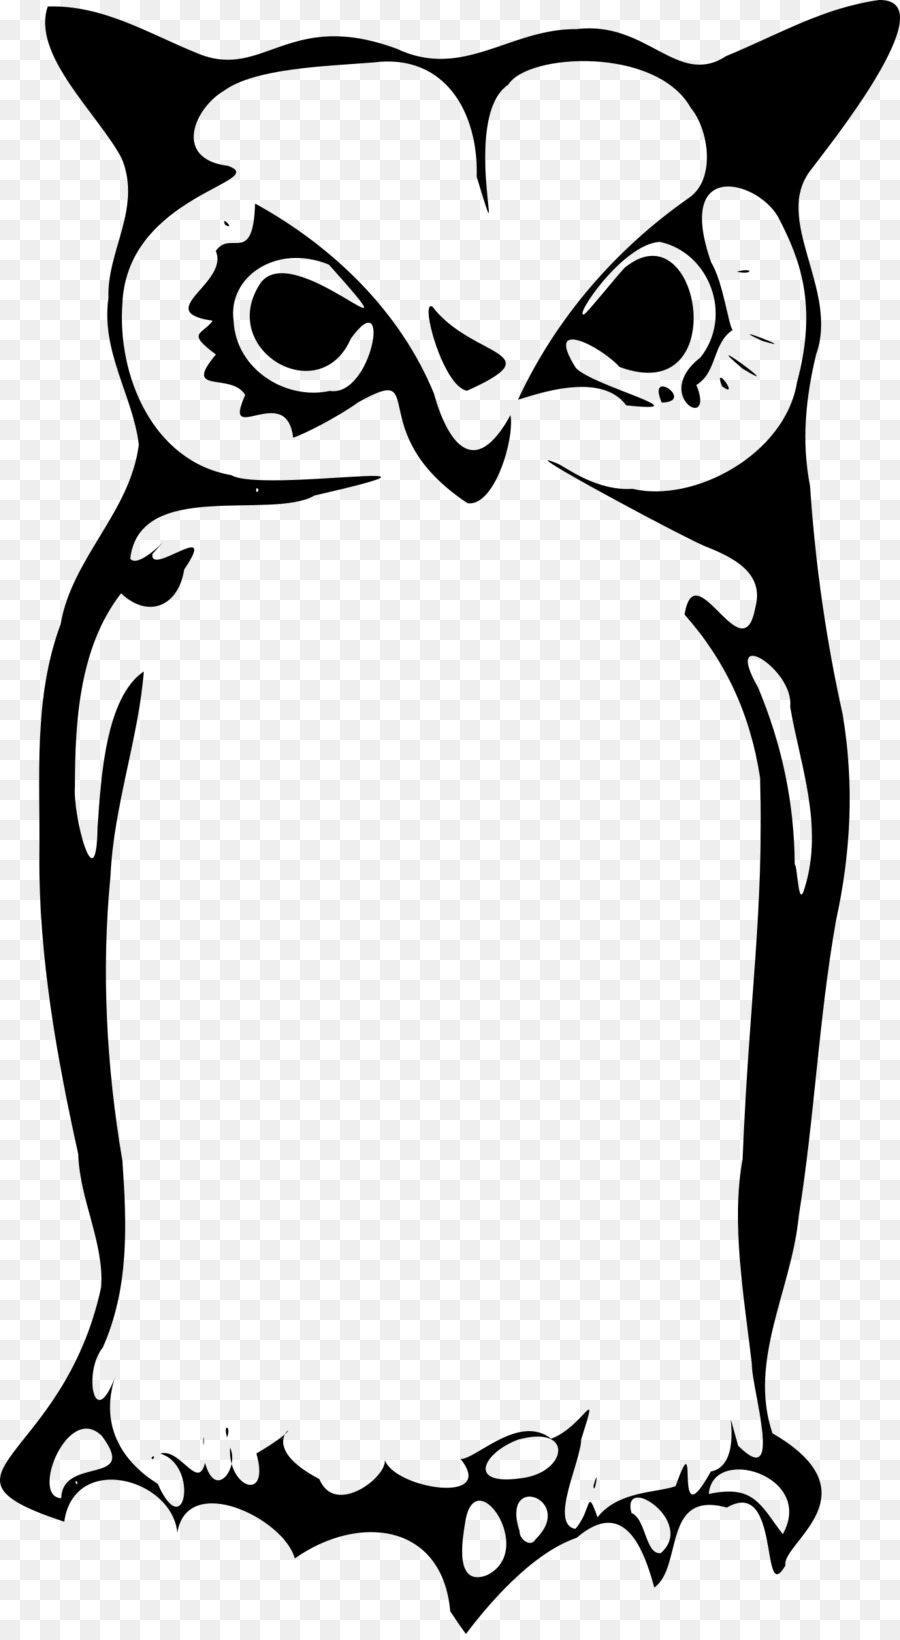 Snowy owl Great Horned Owl Clip art - owl png download - 1322*2400 - Free Transparent Owl png Download.